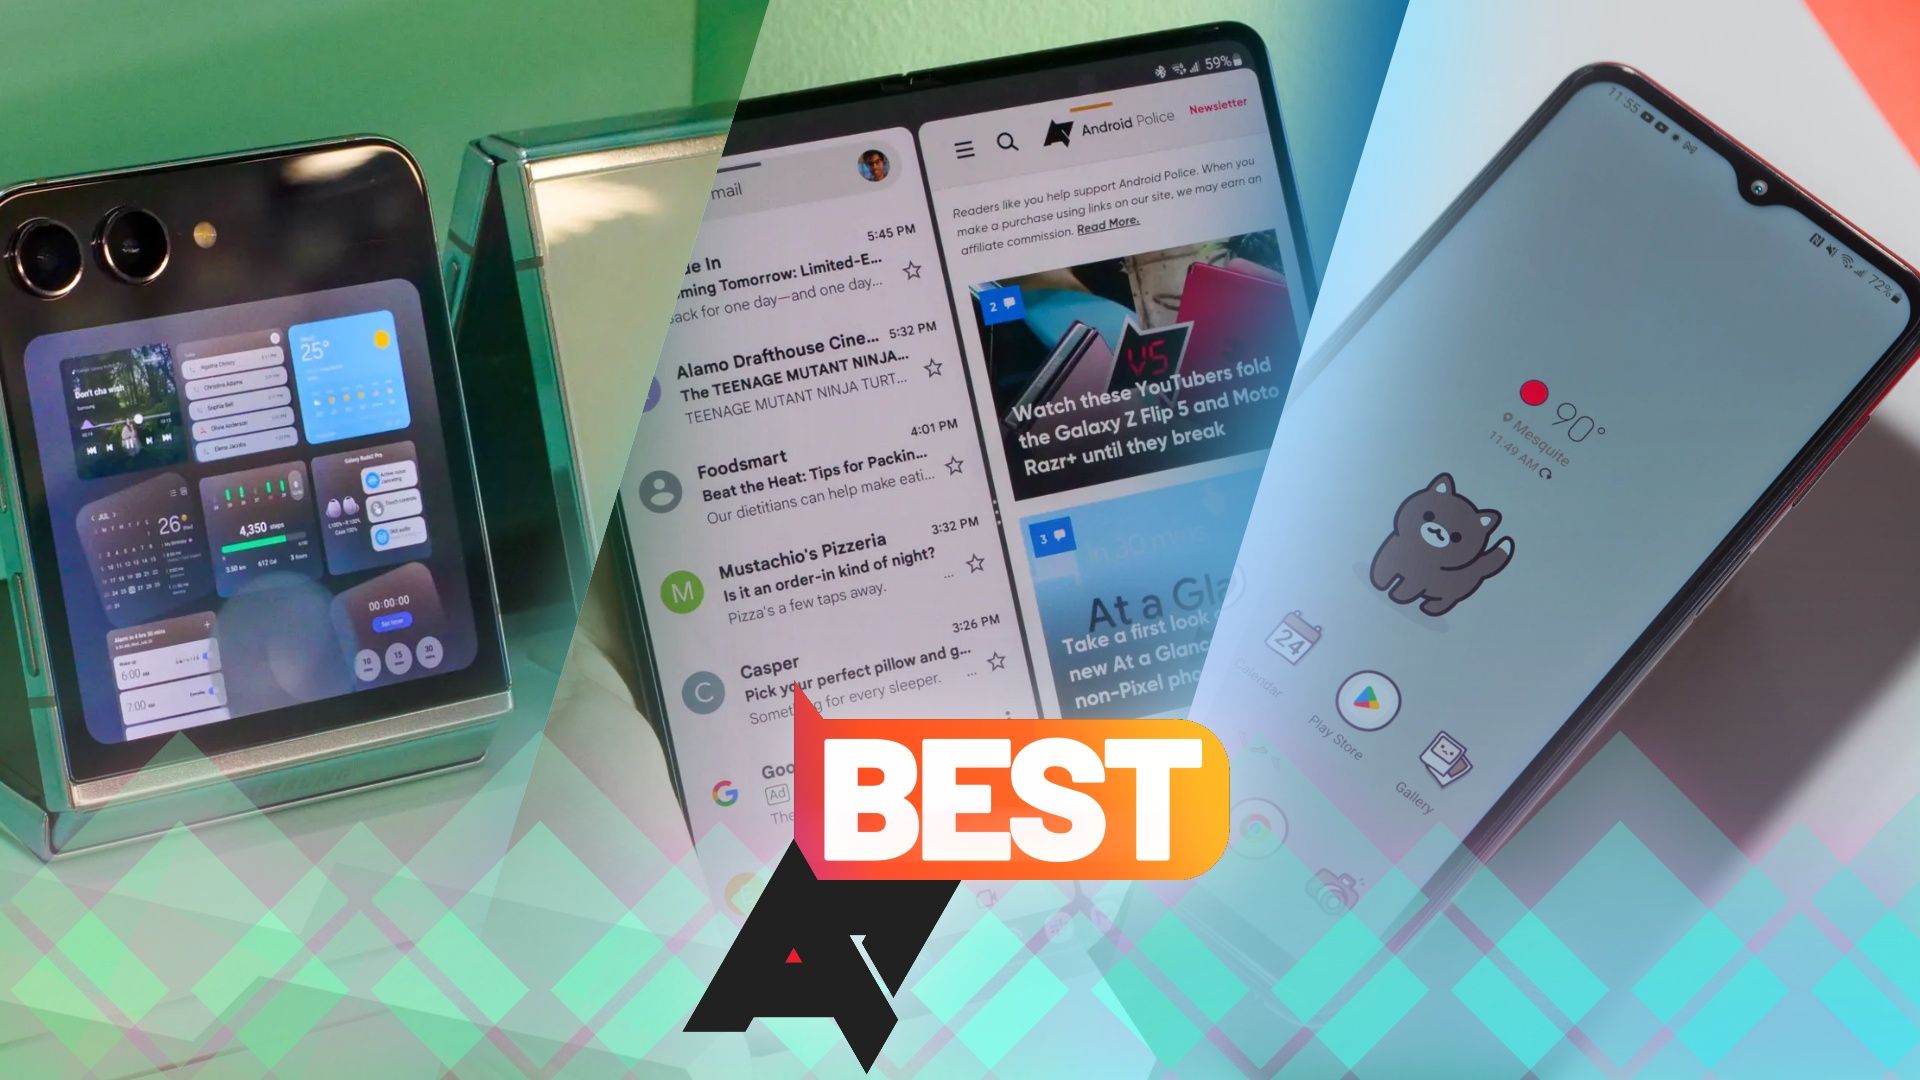 Samsung Galaxy S20 FE buyer's guide: Everything you need to know